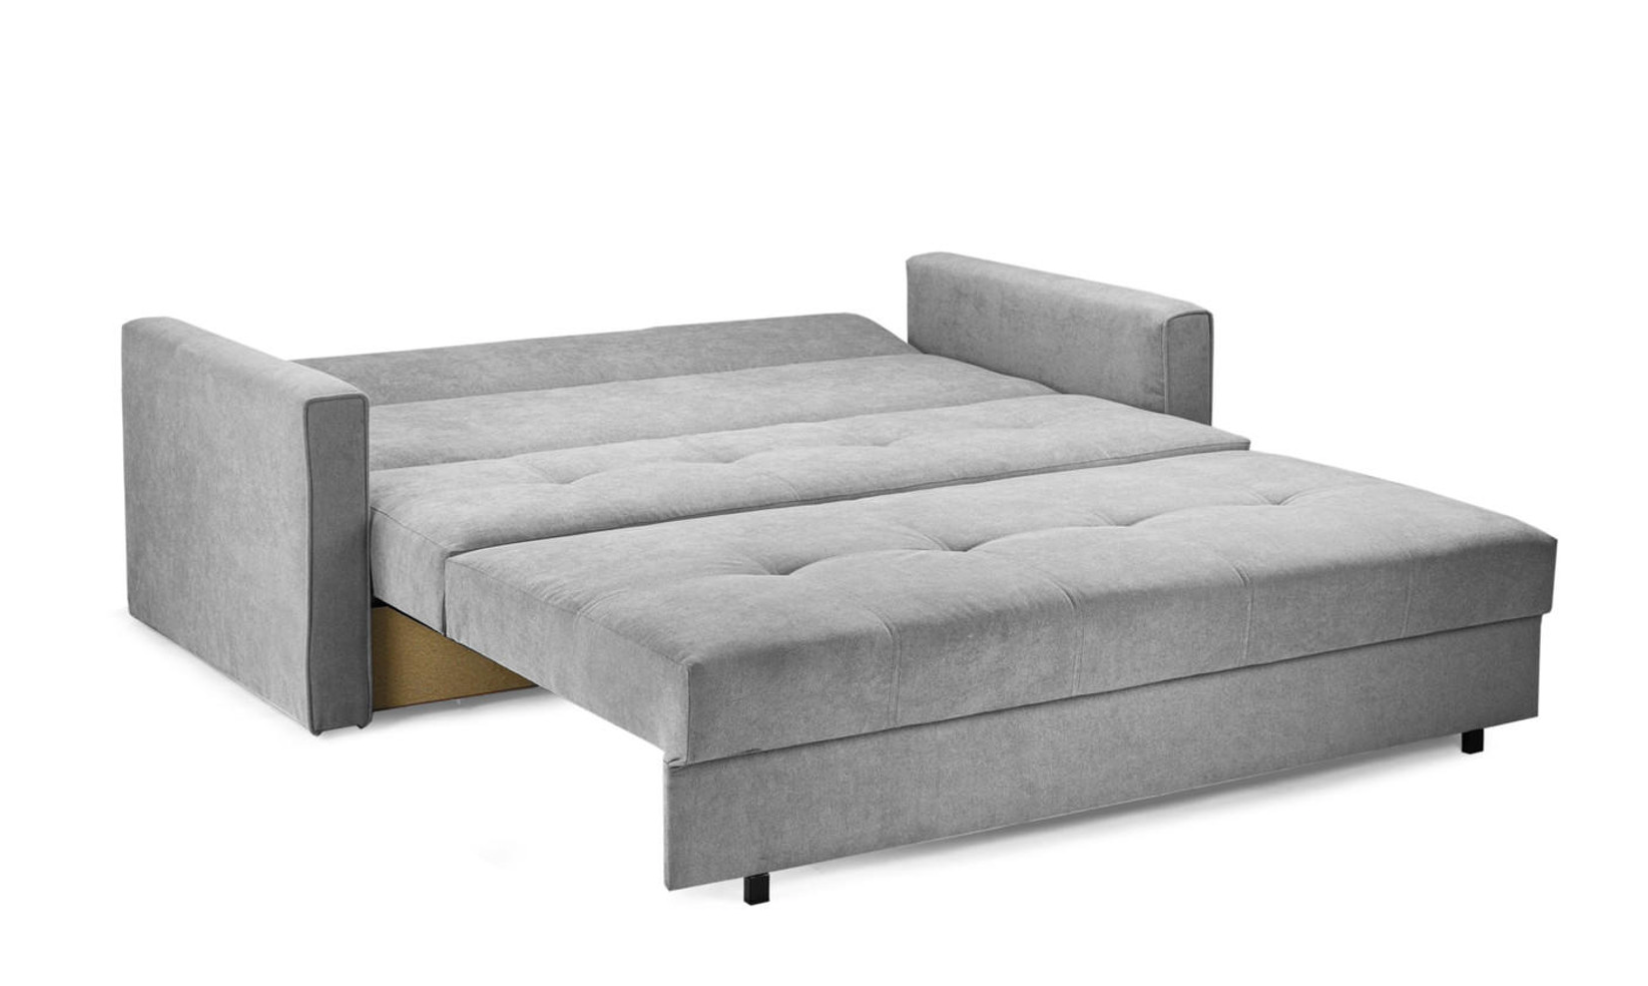 Vienna 3 Seater Sofa Bed With Storage Grey Fabric